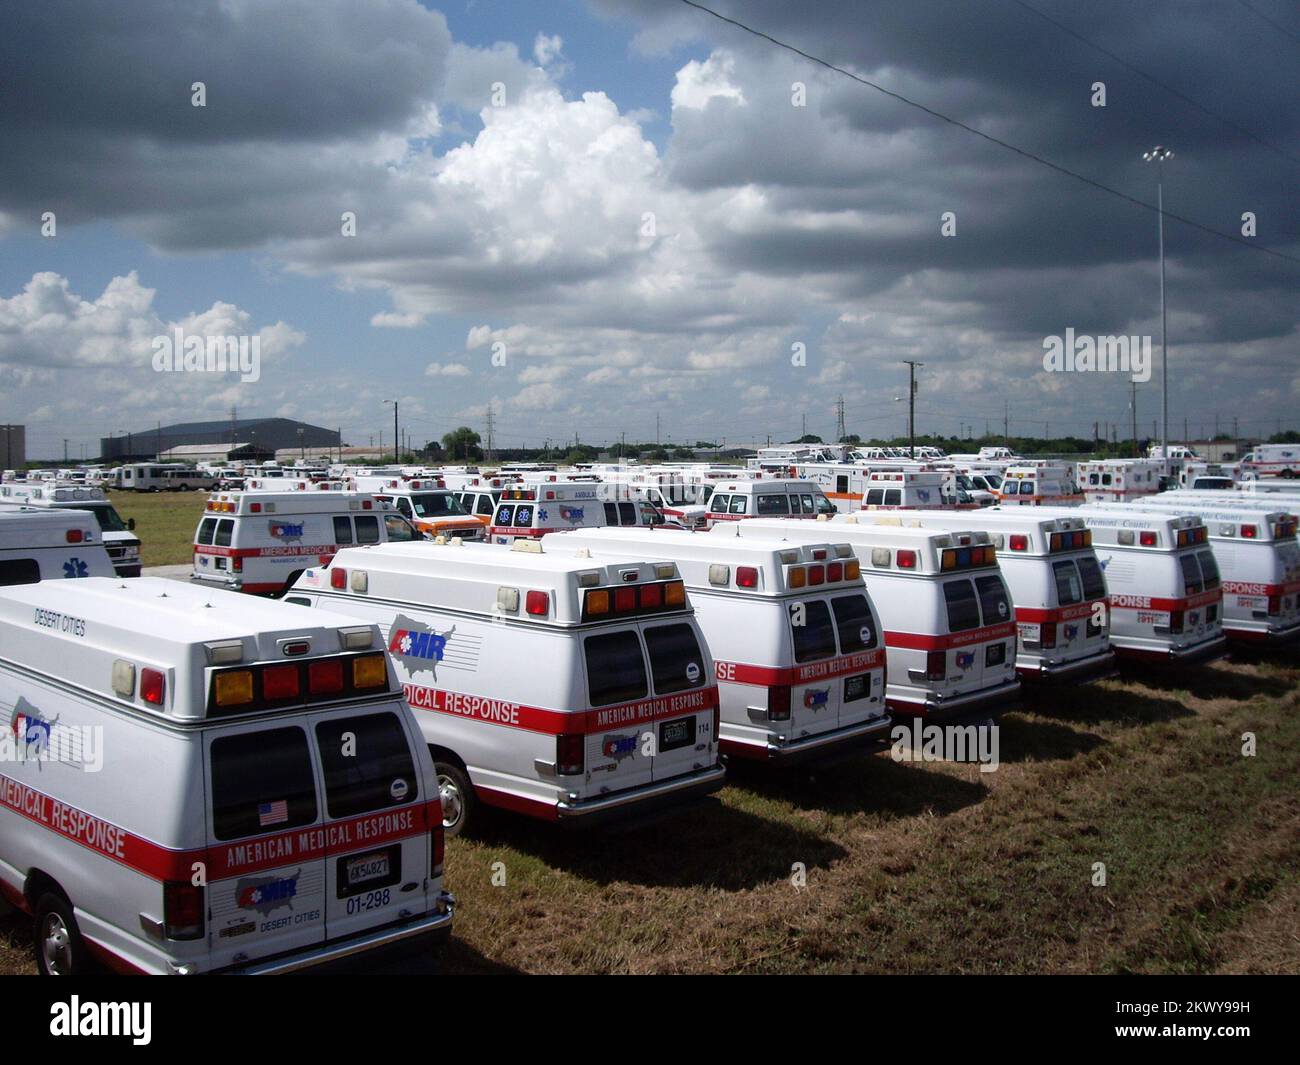 San Antonio, TX, August 22, 2007   Nearly 700 ambulances responded to San Antonio's KellyUSA as part of the critical asset deployment for Hurricane Dean. This mass showing was the largest mobilization of ambulances in the history of the United States.  .. Photographs Relating to Disasters and Emergency Management Programs, Activities, and Officials Stock Photo